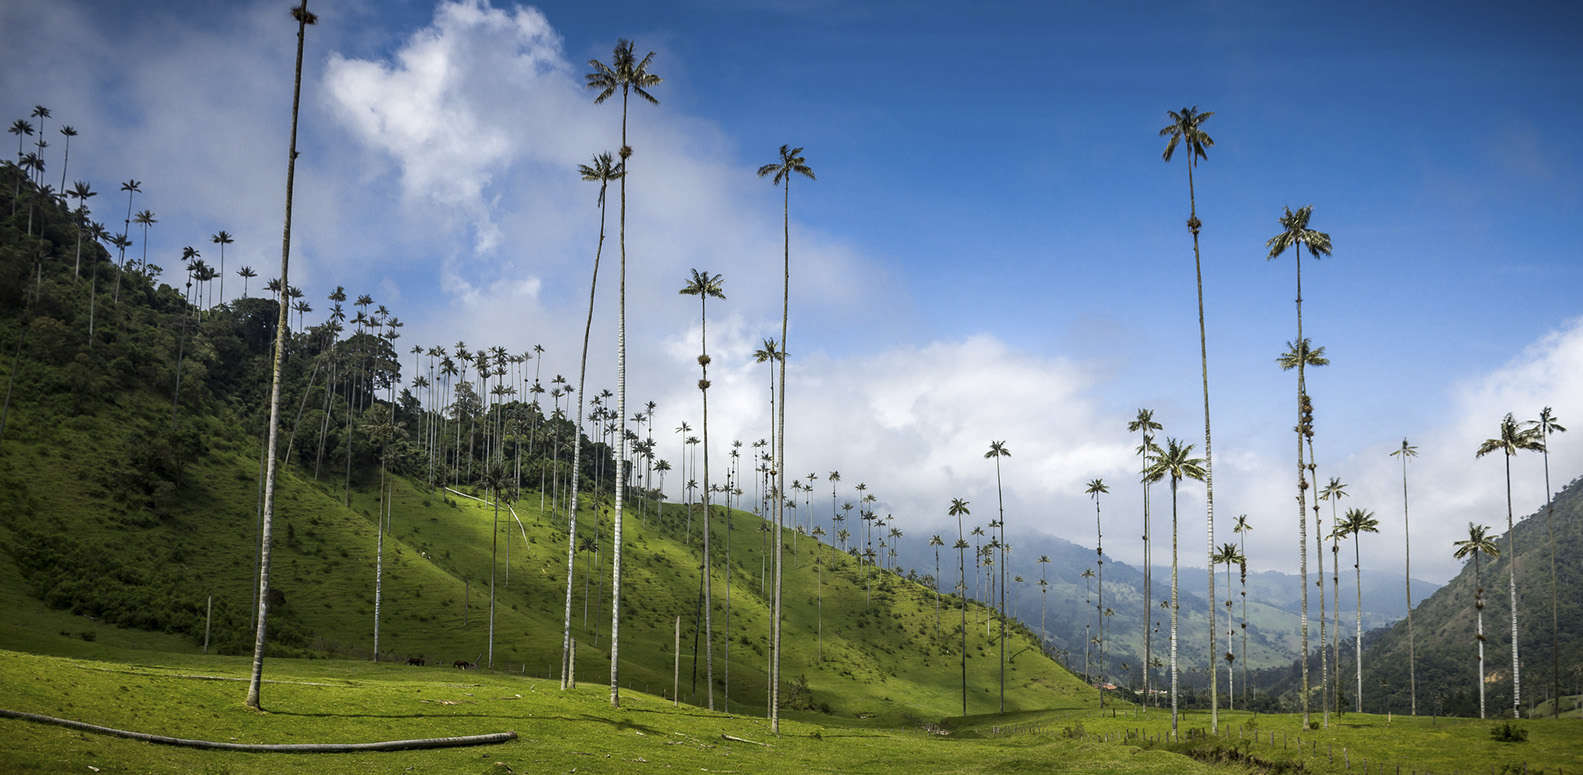 http://julidays.com/images/main/colombia/julidays-destinos-colombia-valledelcocora-04.jpg